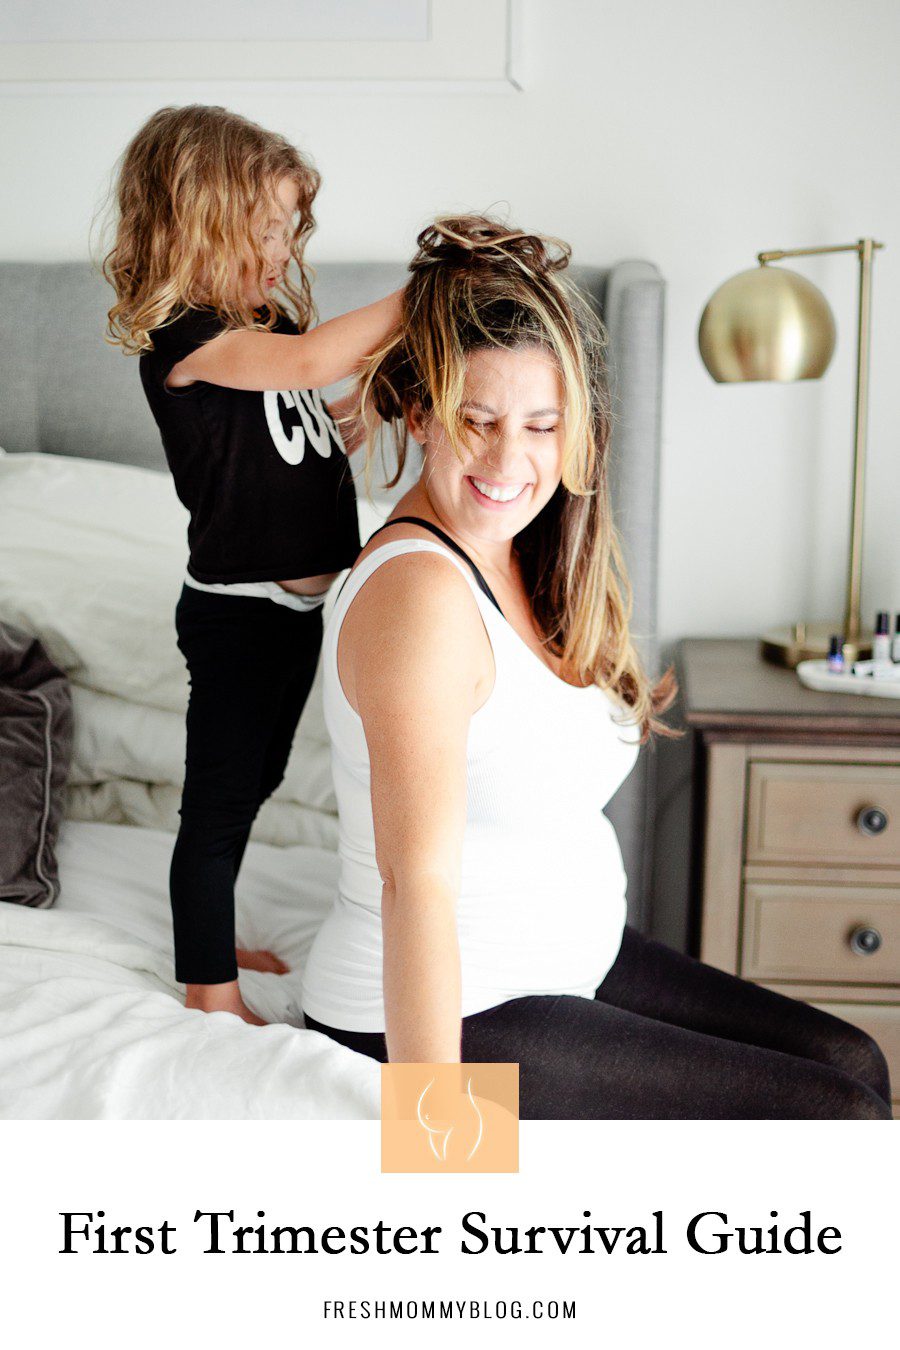 My First Trimester Survival Guide: Tips and Favorites | First Trimester Pregnancy Essentials: An Early Pregnancy Survival Guide by popular Florida lifestyle blog, Fresh Mommy Blog: Pinterest graphic of a mom sitting on her bed while her young daughter stand behind her and plays with her hair.